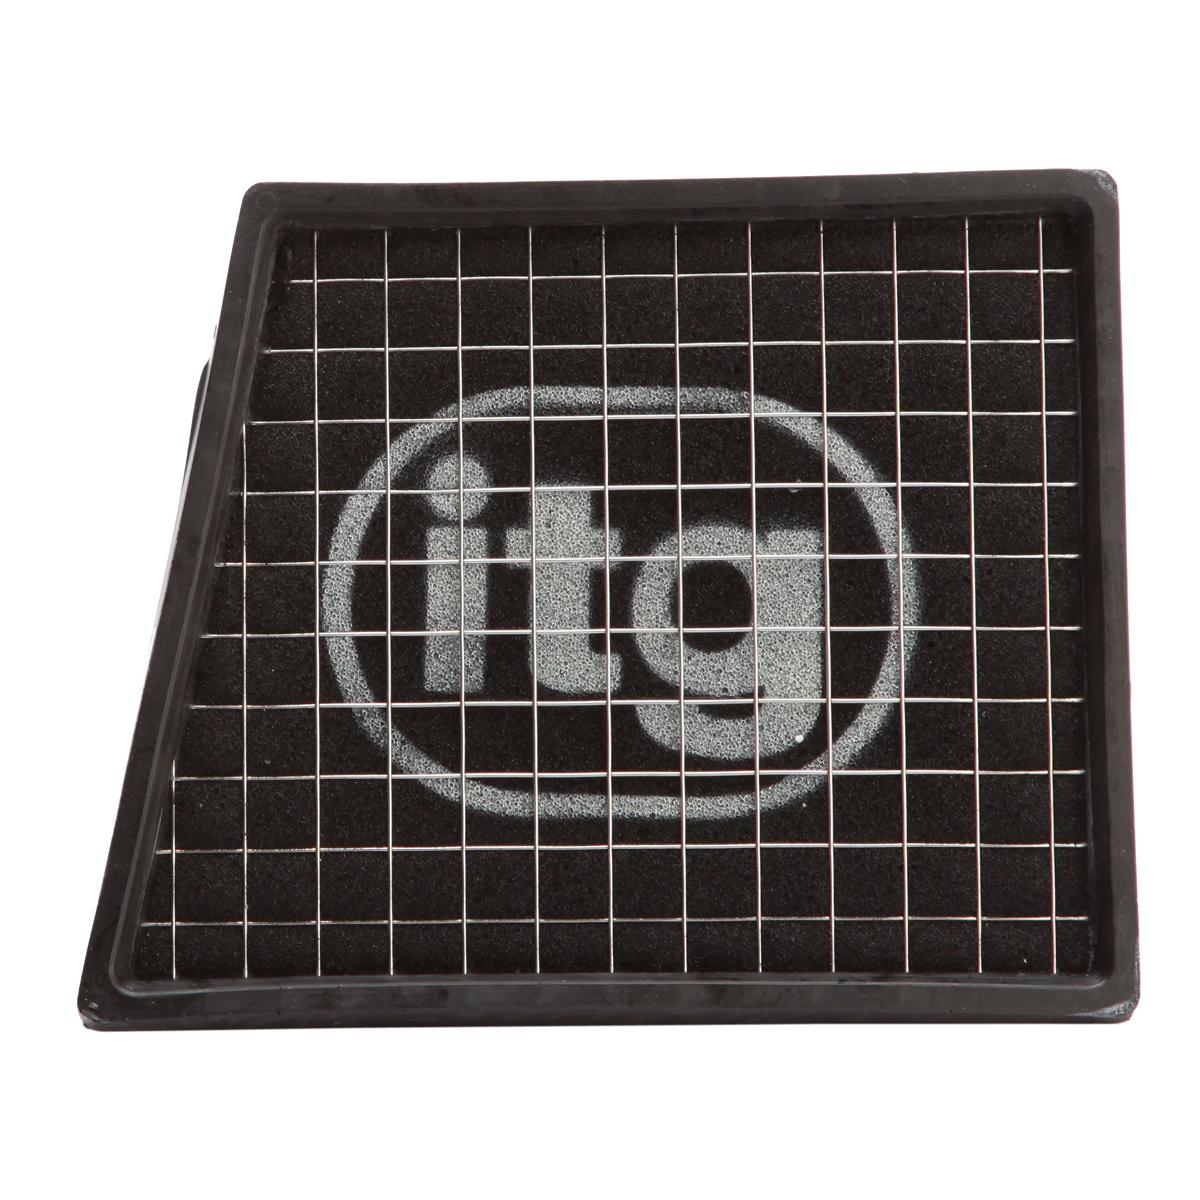 ITG Air Filter For Mazda 2 1.2, 1.4, 1.6 (03/03-10/07)